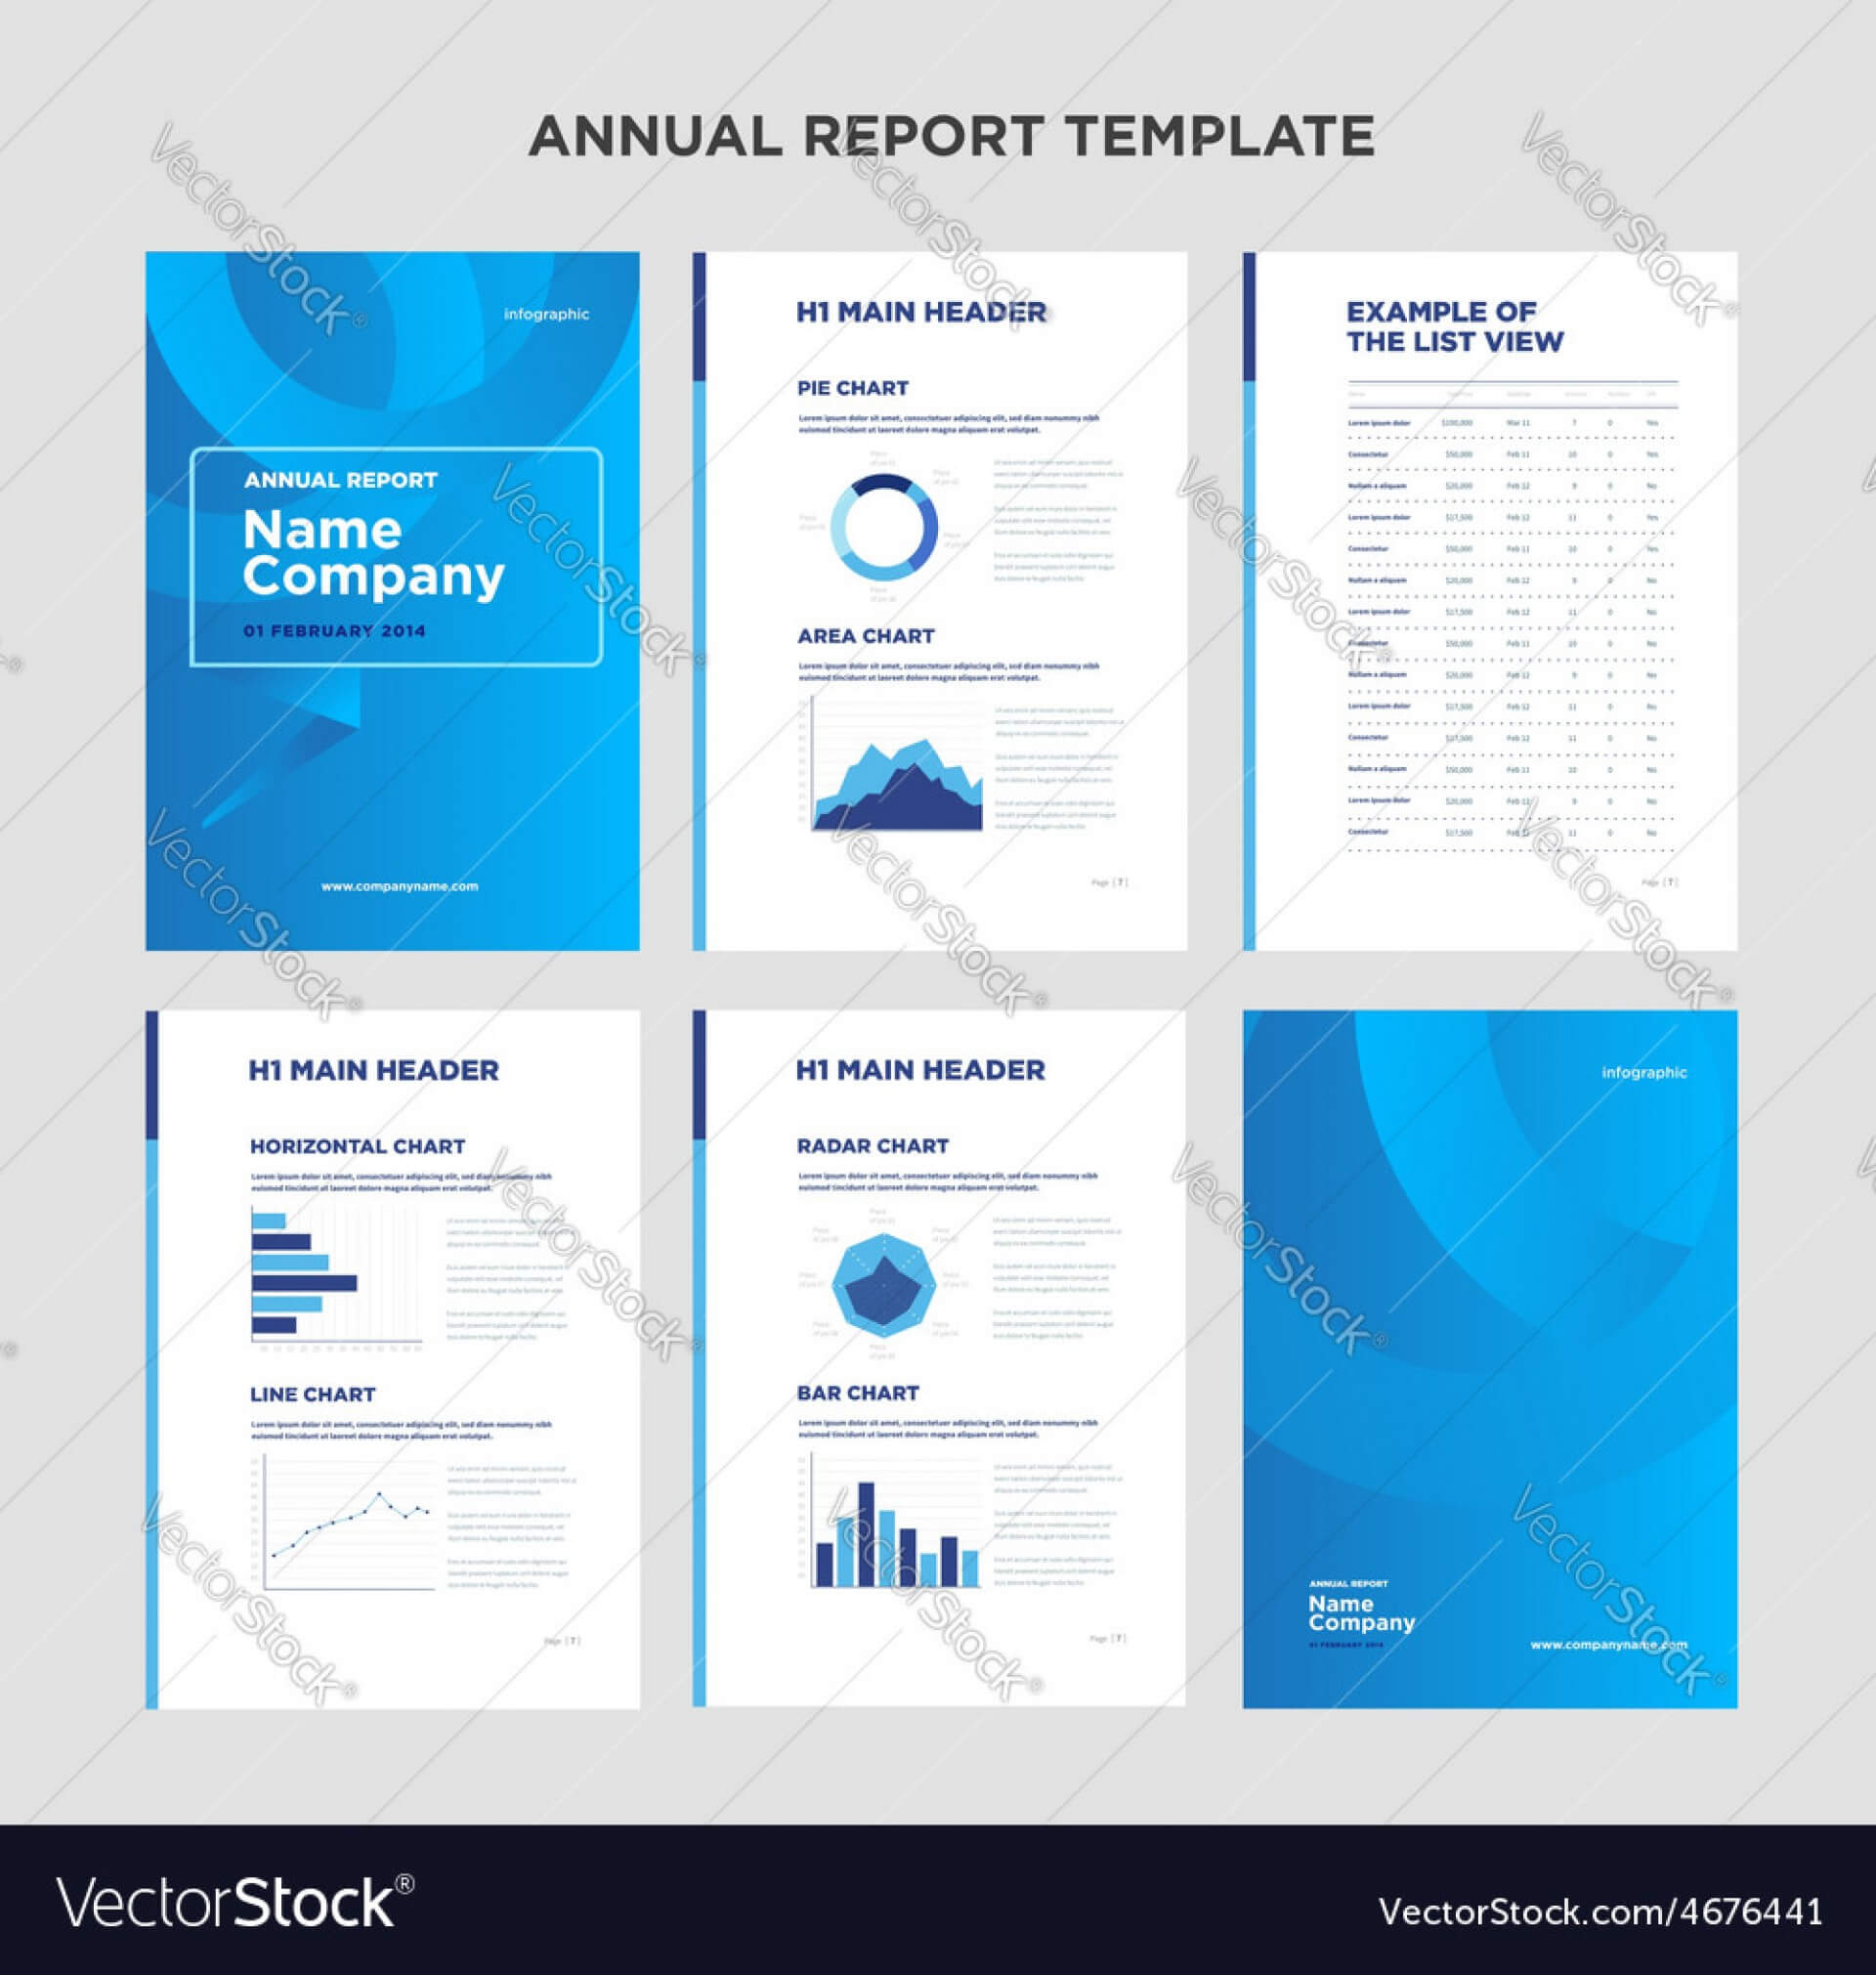 013 Annual Report Template Word Fearsome Ideas Free Throughout Annual Report Word Template